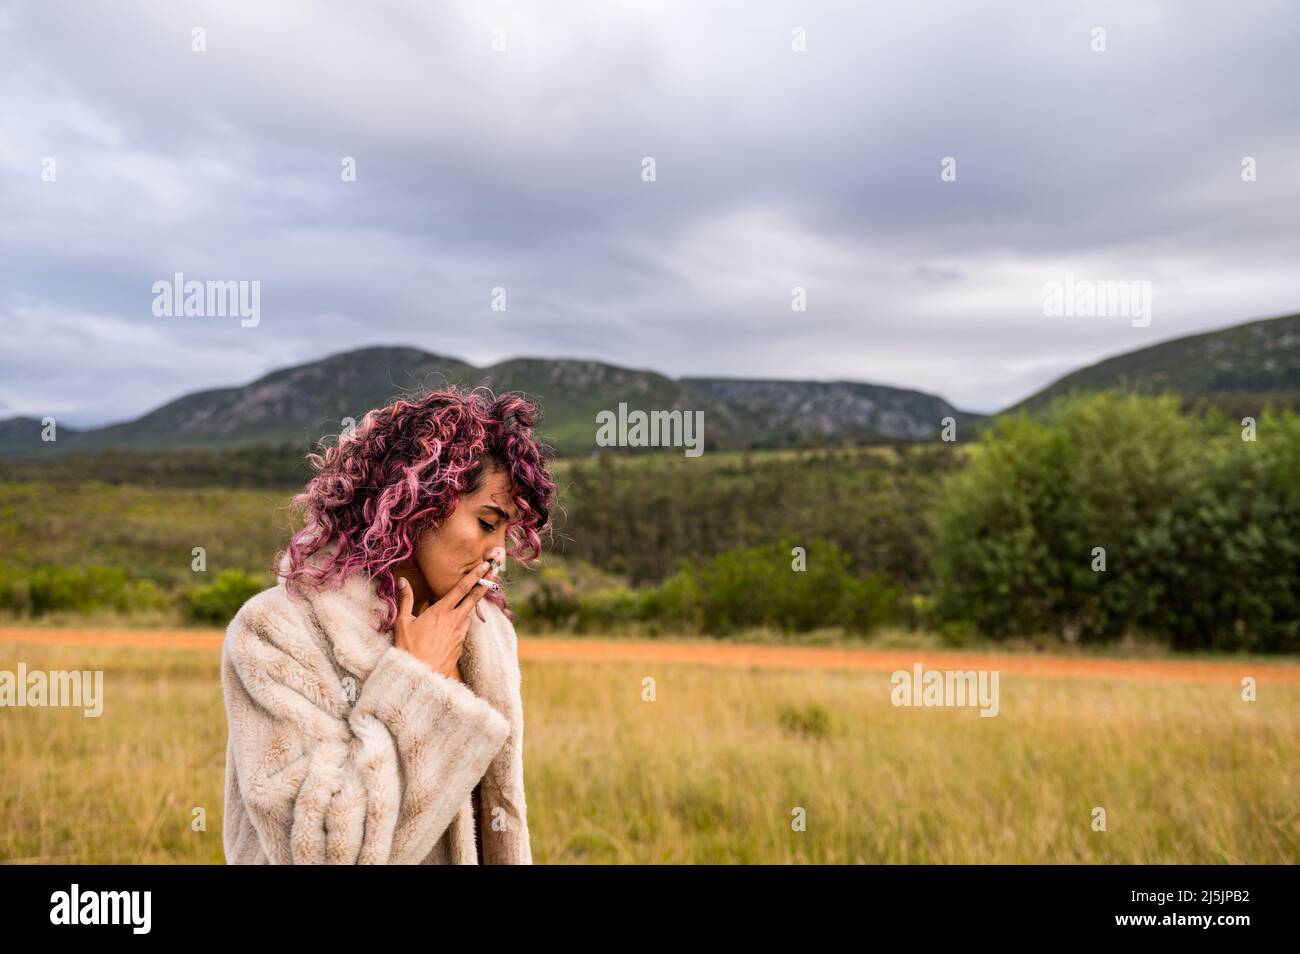 Woman seen smoking a cigarette in nature Stock Photo